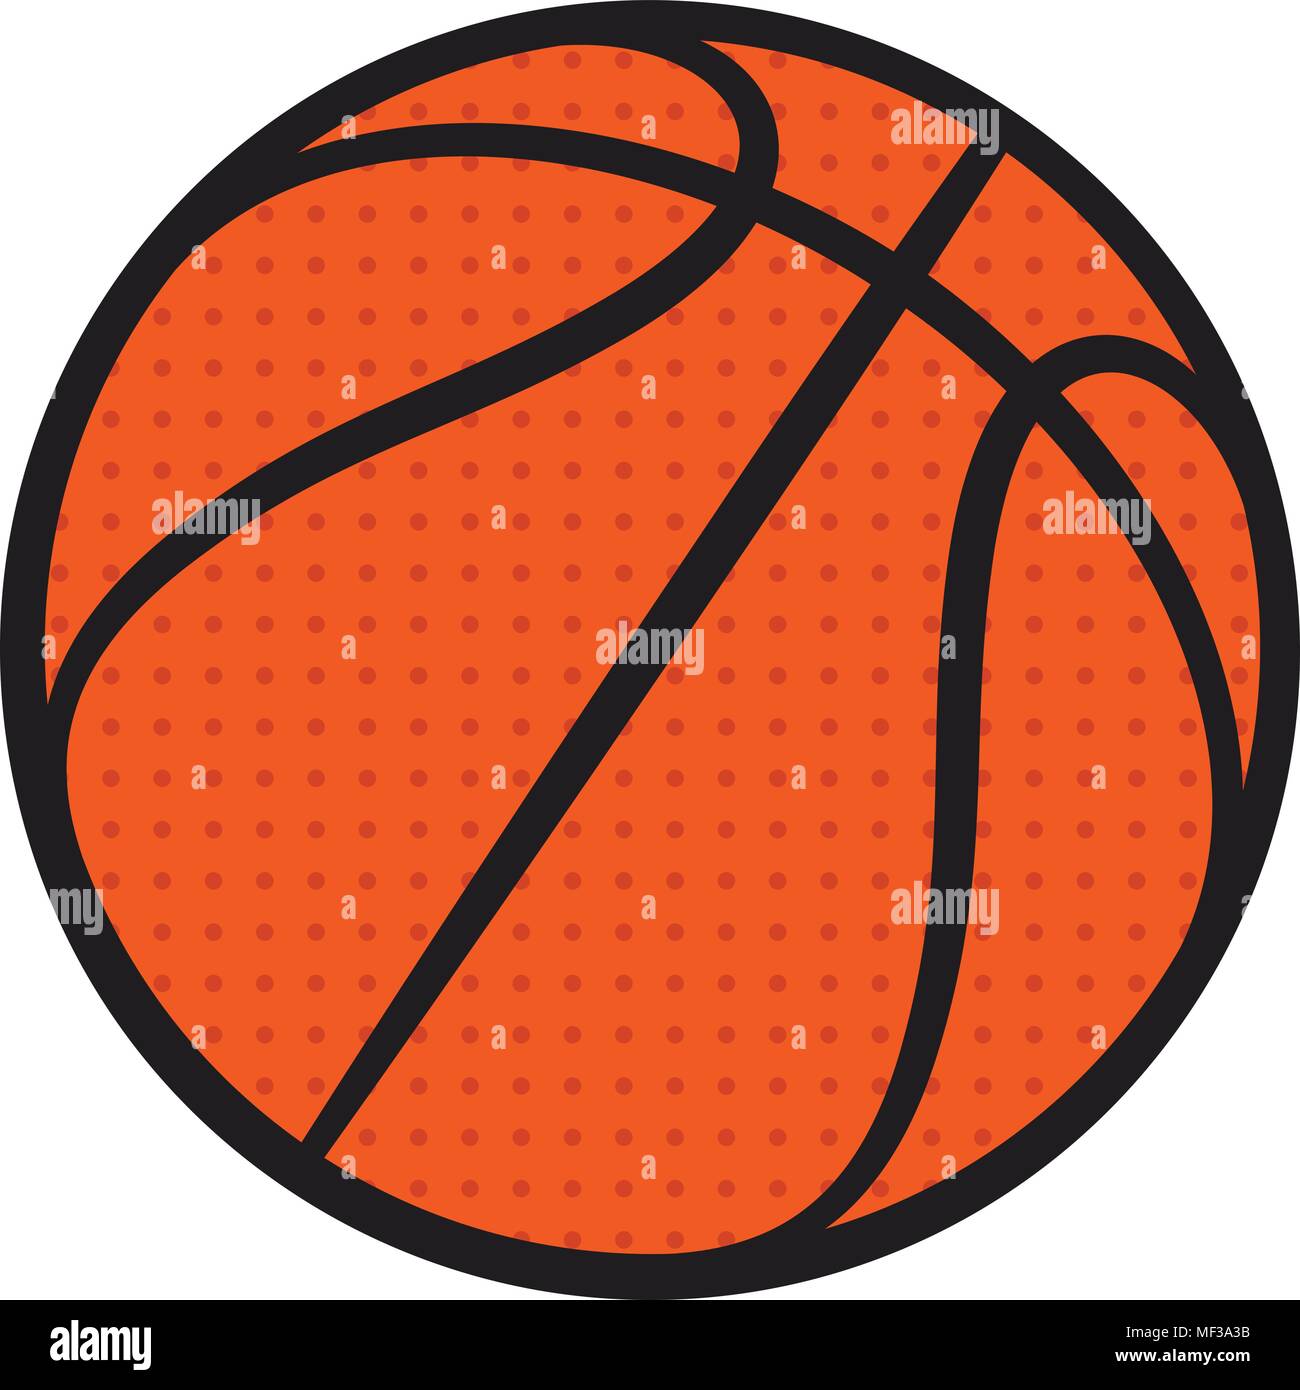 Basketball Stock Vector Images - Alamy